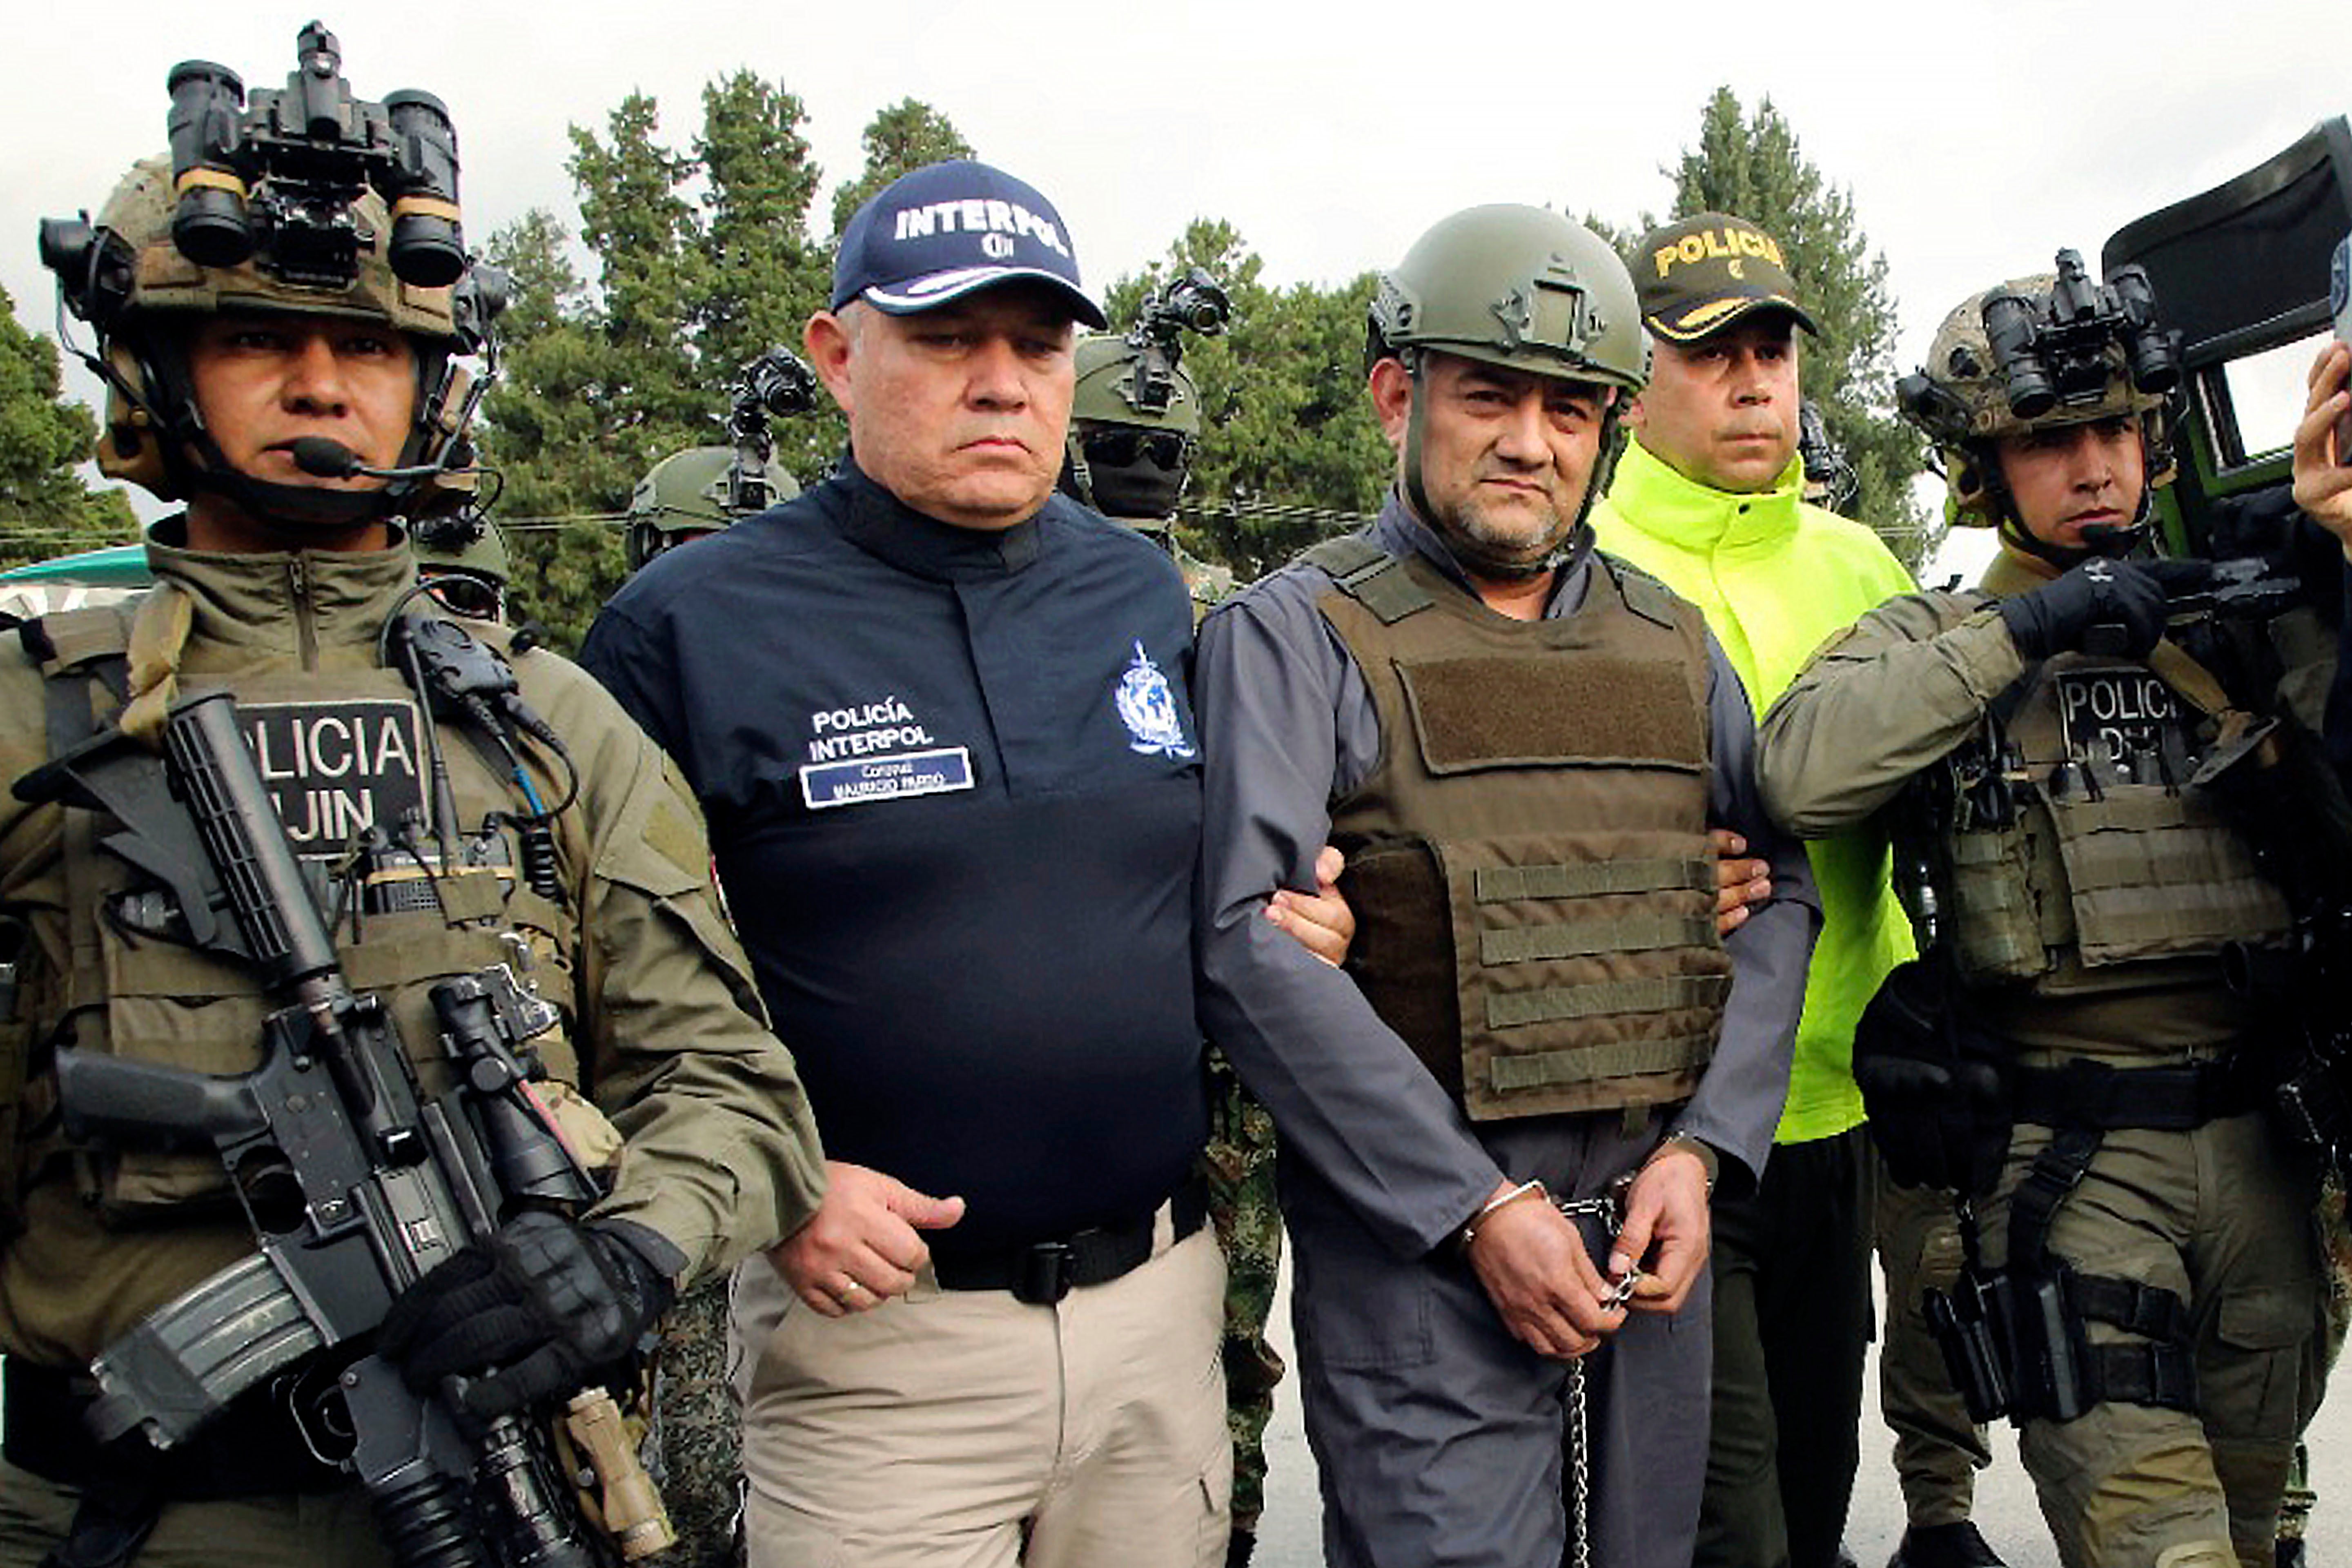 Police escort Dairo Antonio Usuga, known as Otoniel, at a military airport in Bogota, Colombia, in May 2022